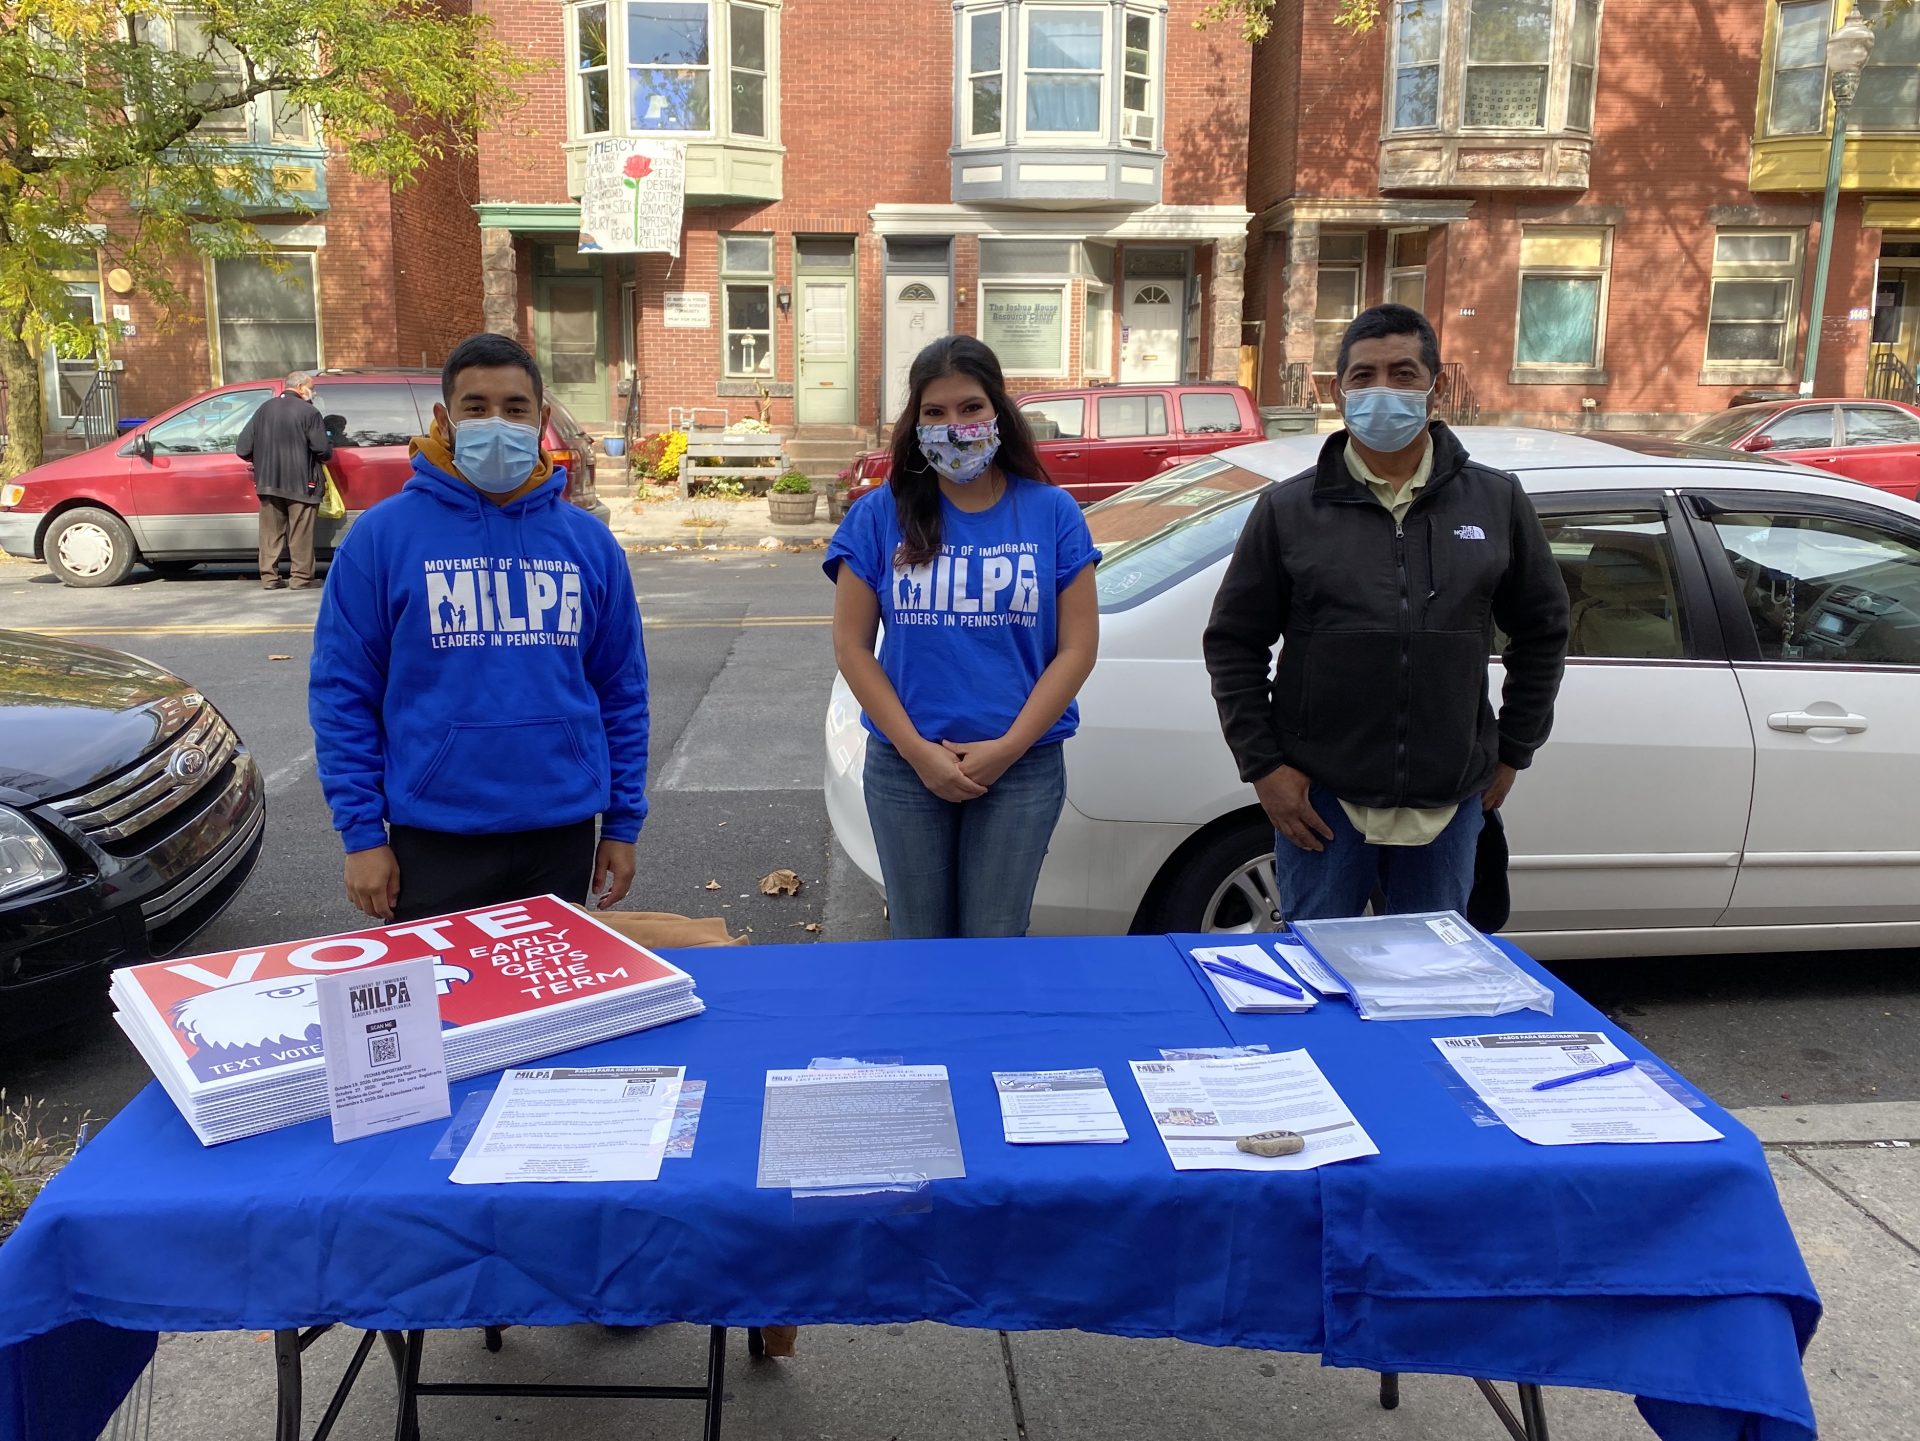 Members of the organization Movement of Immigrant Leaders in Pennsylvania register voters outside a Catholic church in Harrisburg. Alanna Elder/WITF